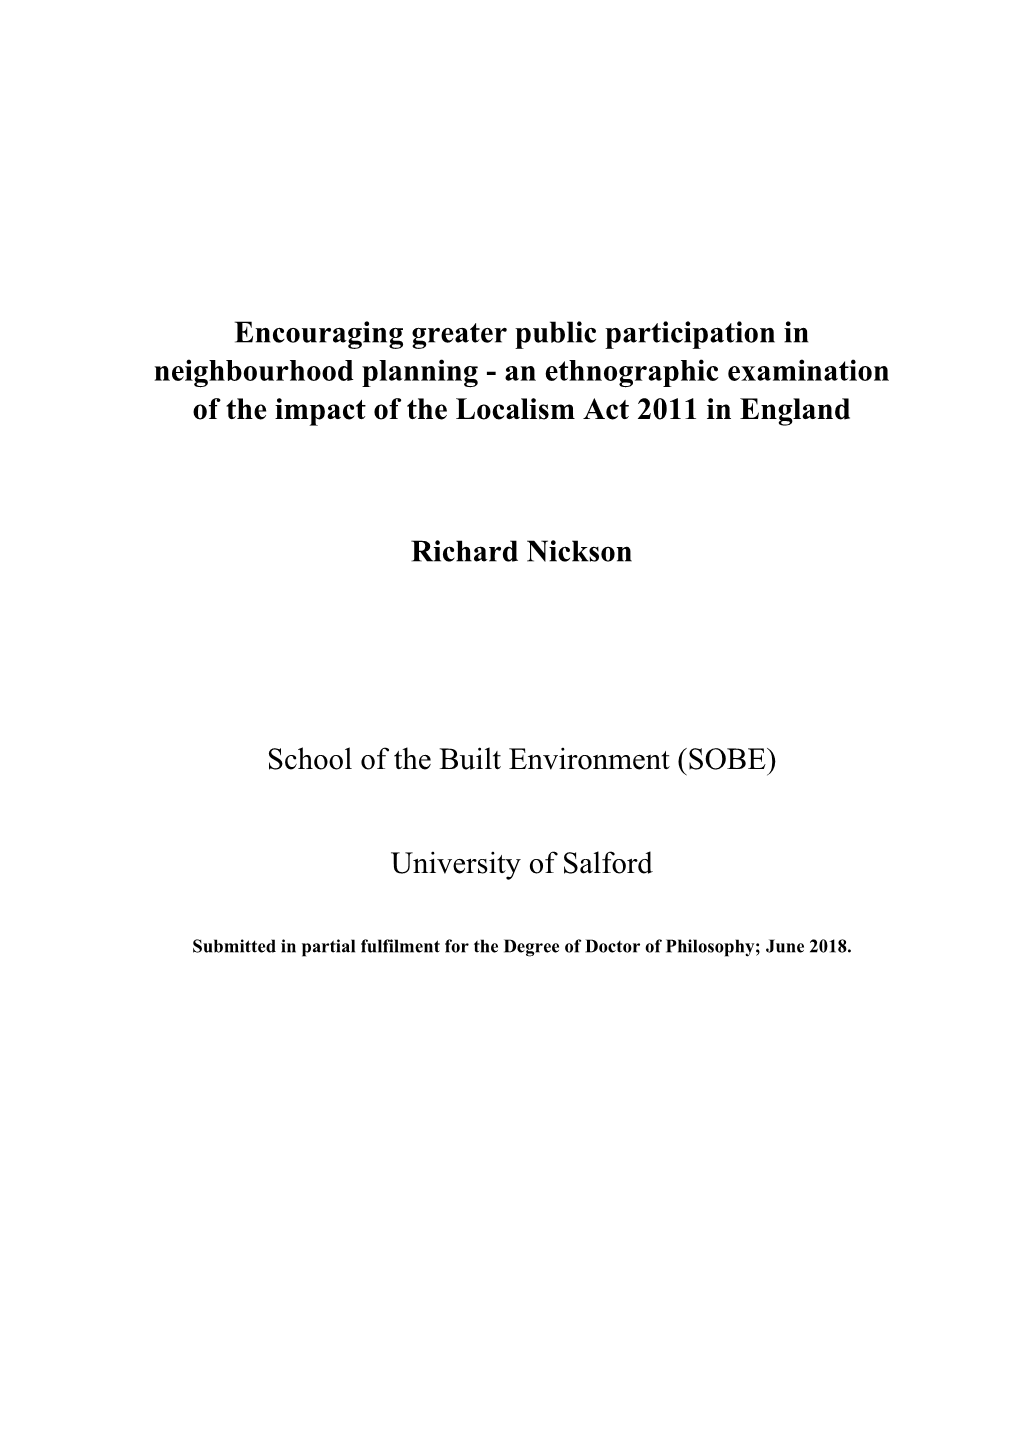 Encouraging Greater Public Participation in Neighbourhood Planning - an Ethnographic Examination of the Impact of the Localism Act 2011 in England